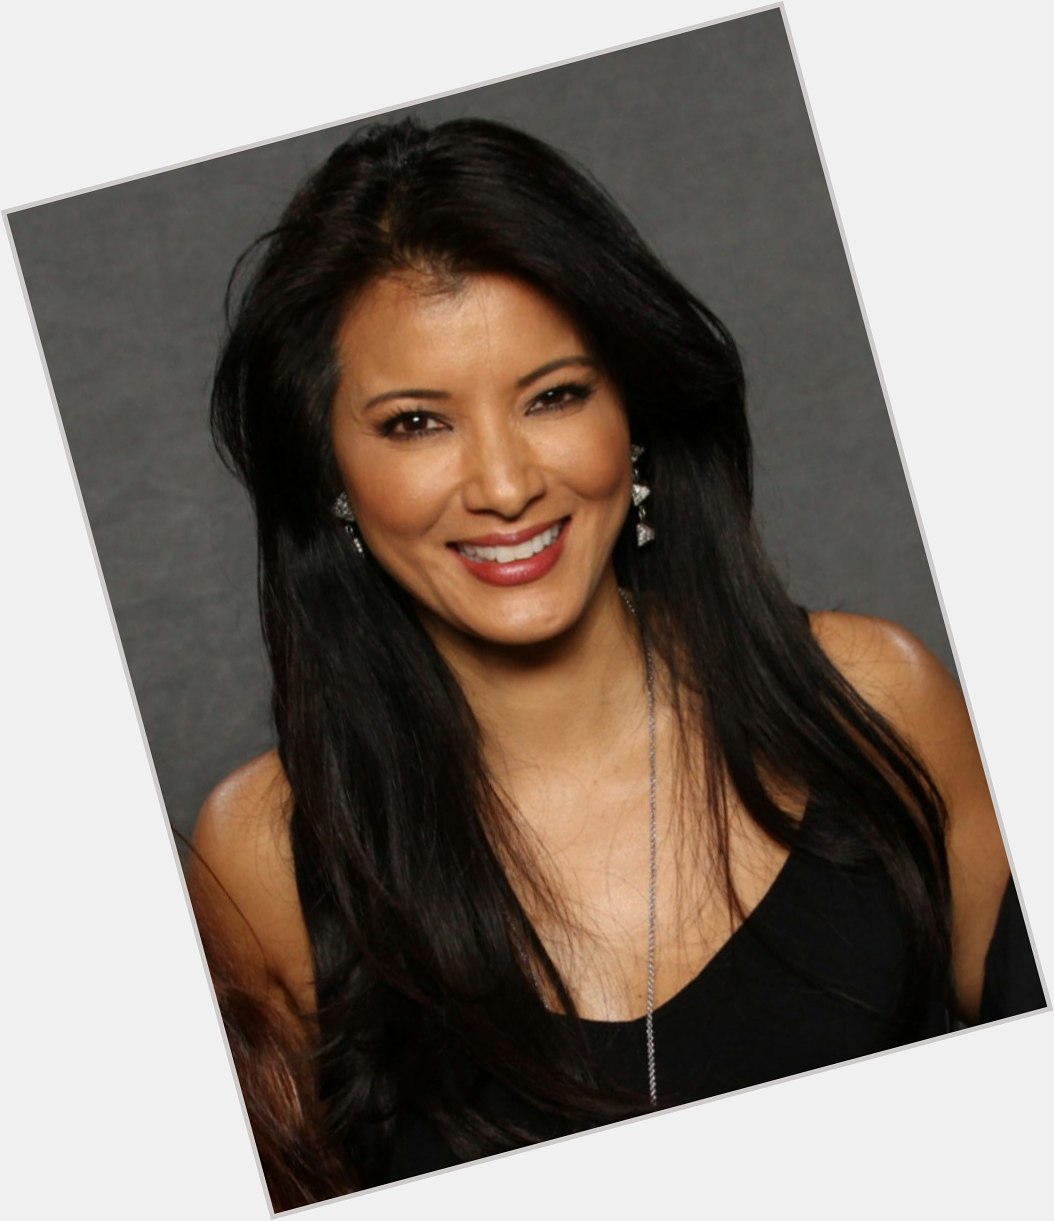 Happy birthday to my one and only babes Kelly Hu. Will you be my valentine 